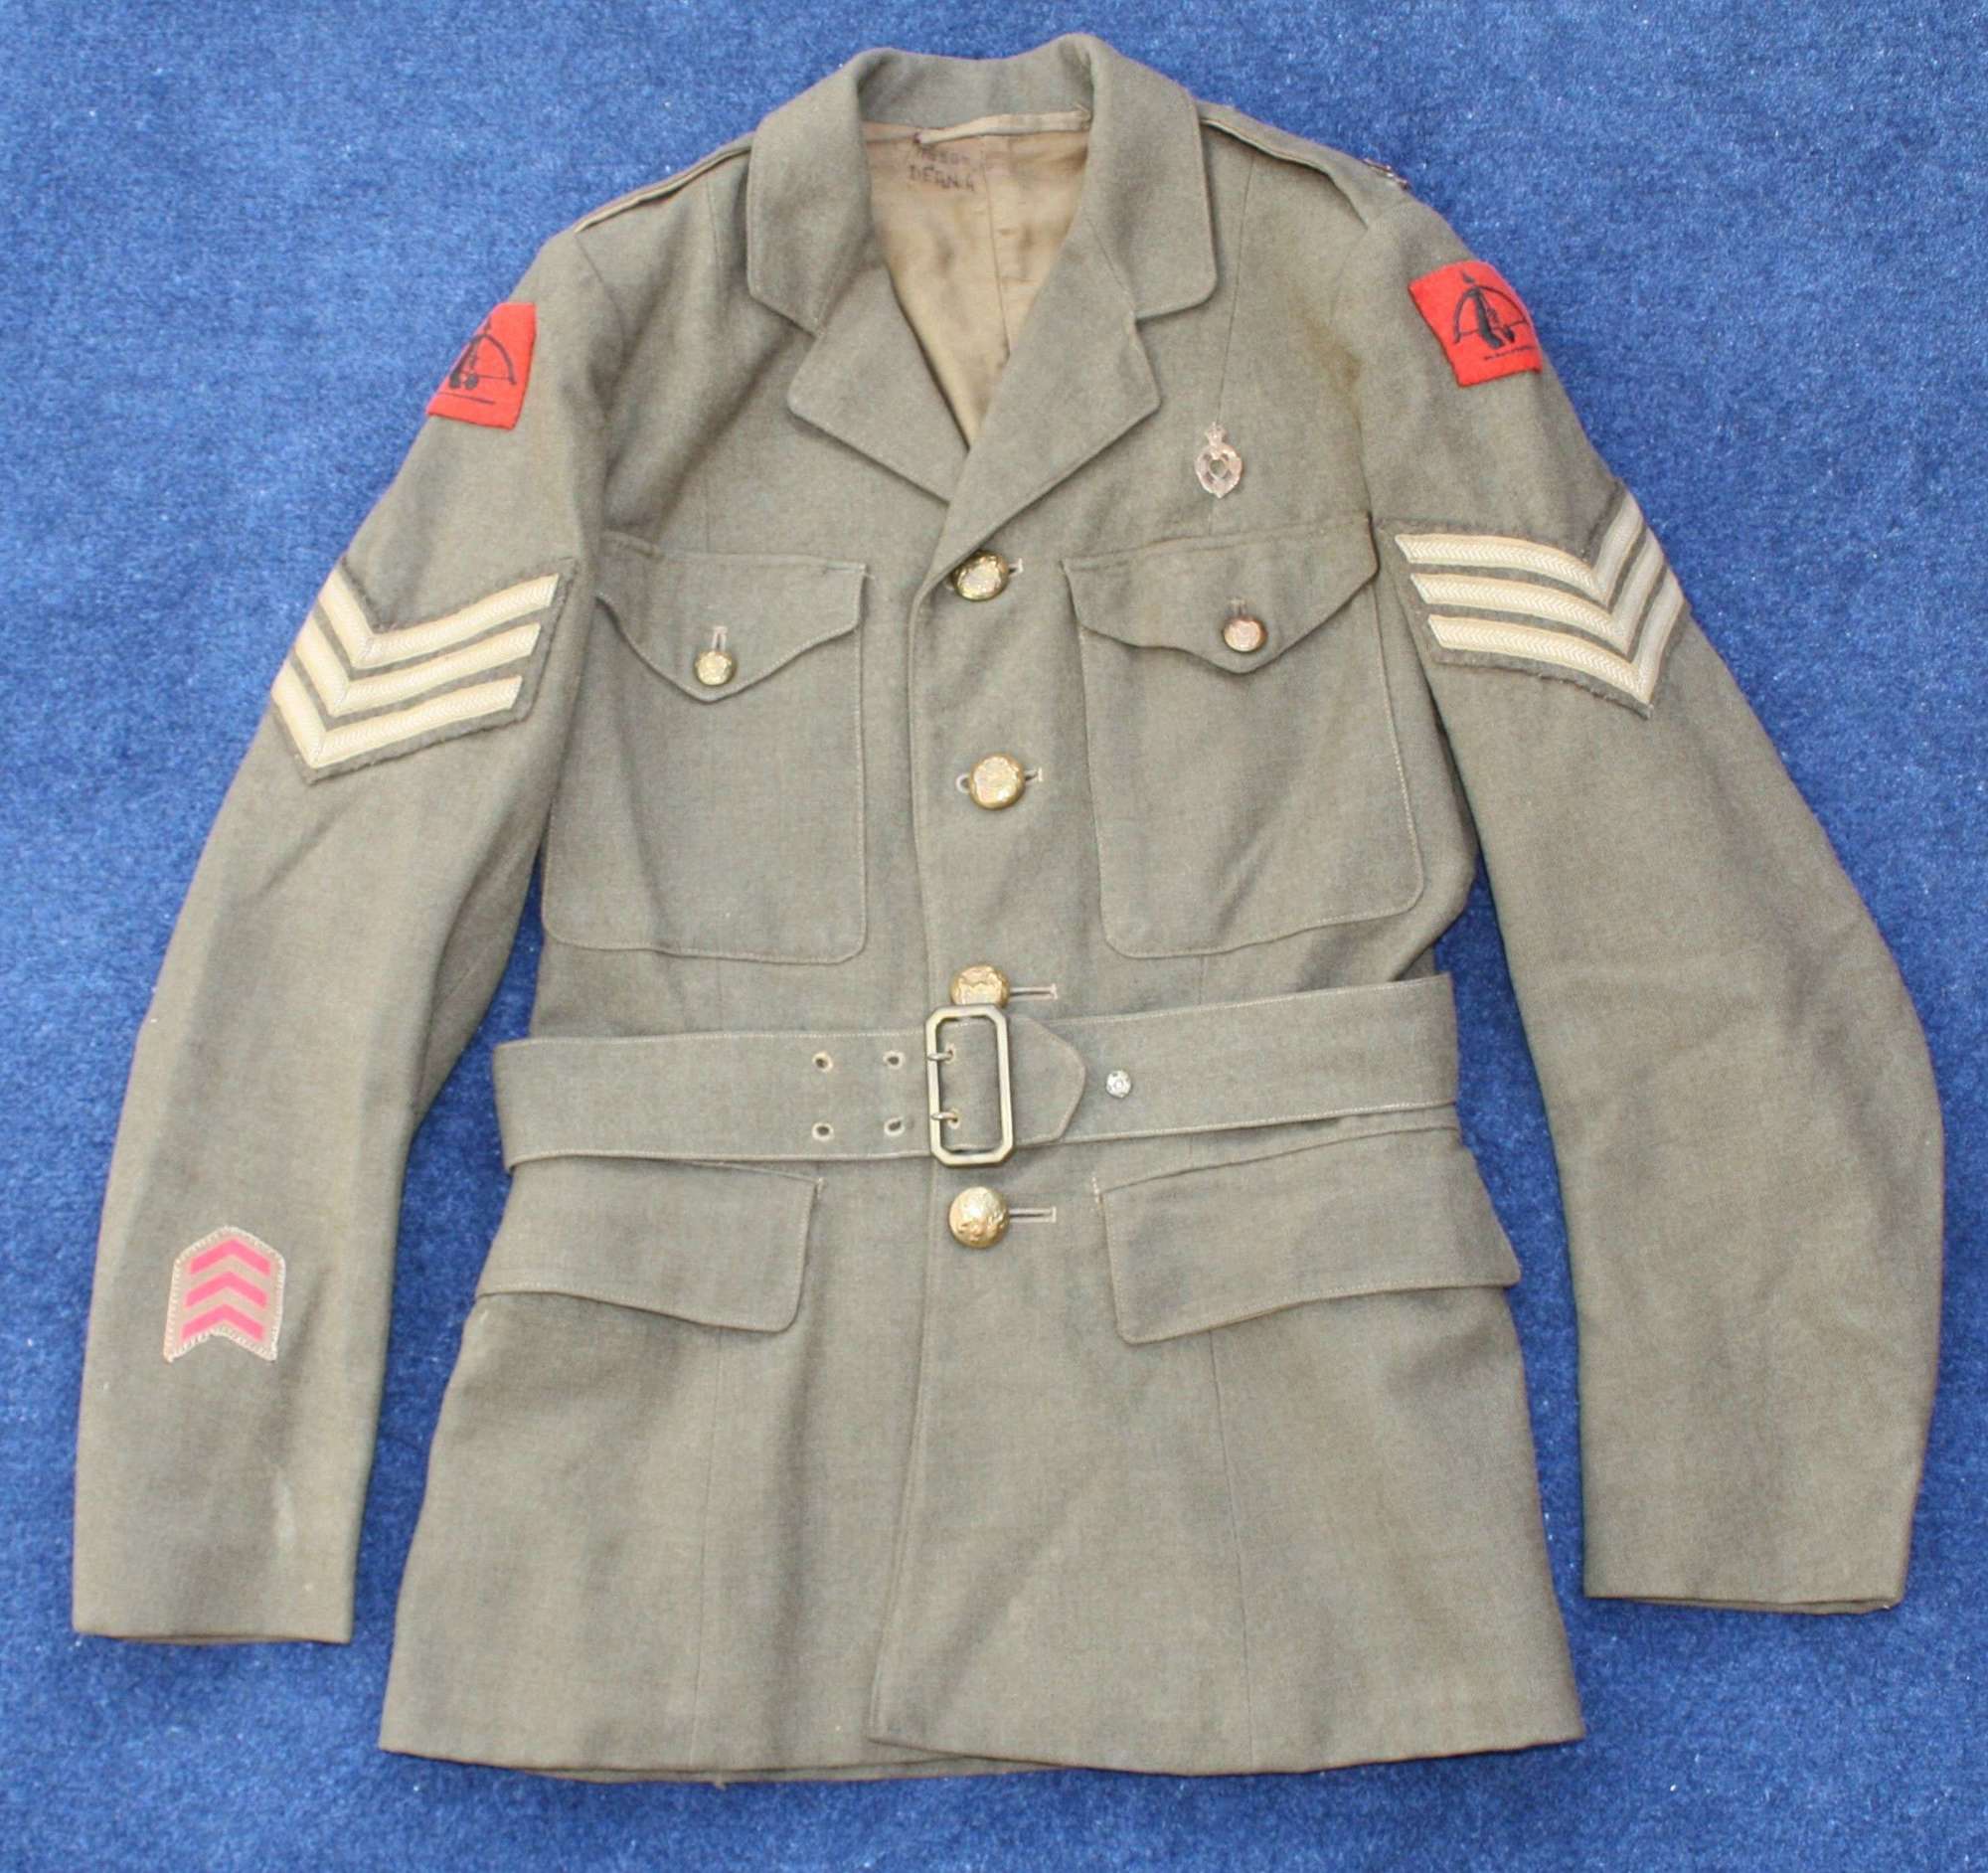 WW2 ATS WOMEN'S 'AUXILIARY TERRITORIAL SERVICE' NAMED TUNIC